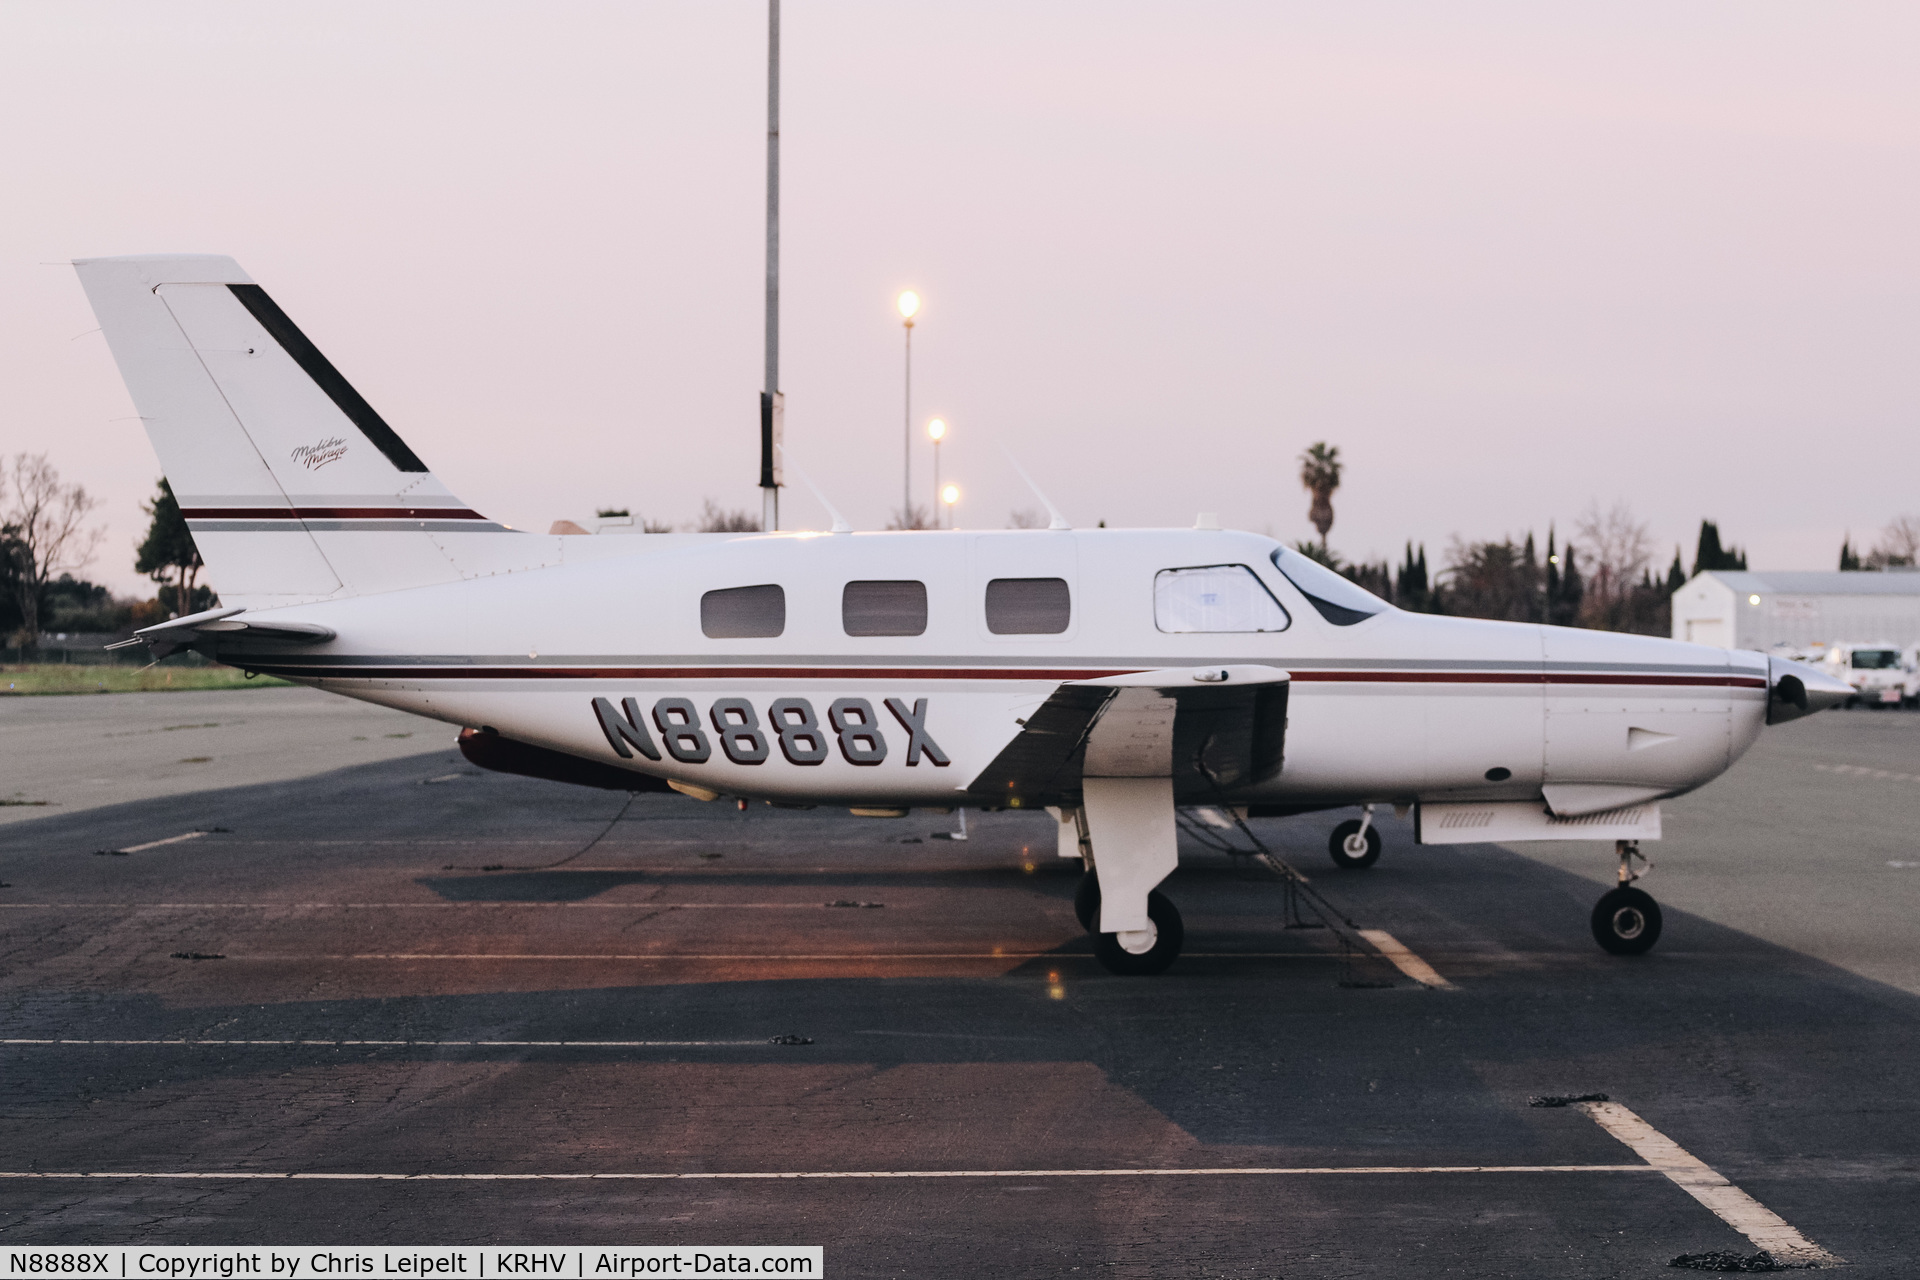 N8888X, 1989 Piper PA-46-350P Malibu Mirage C/N 4622078, 1989 Piper PA-46-350P Malibu visiting at Reid Hillview Airport, San Jose, CA. Repositioned to Houston, TX in January 2018.